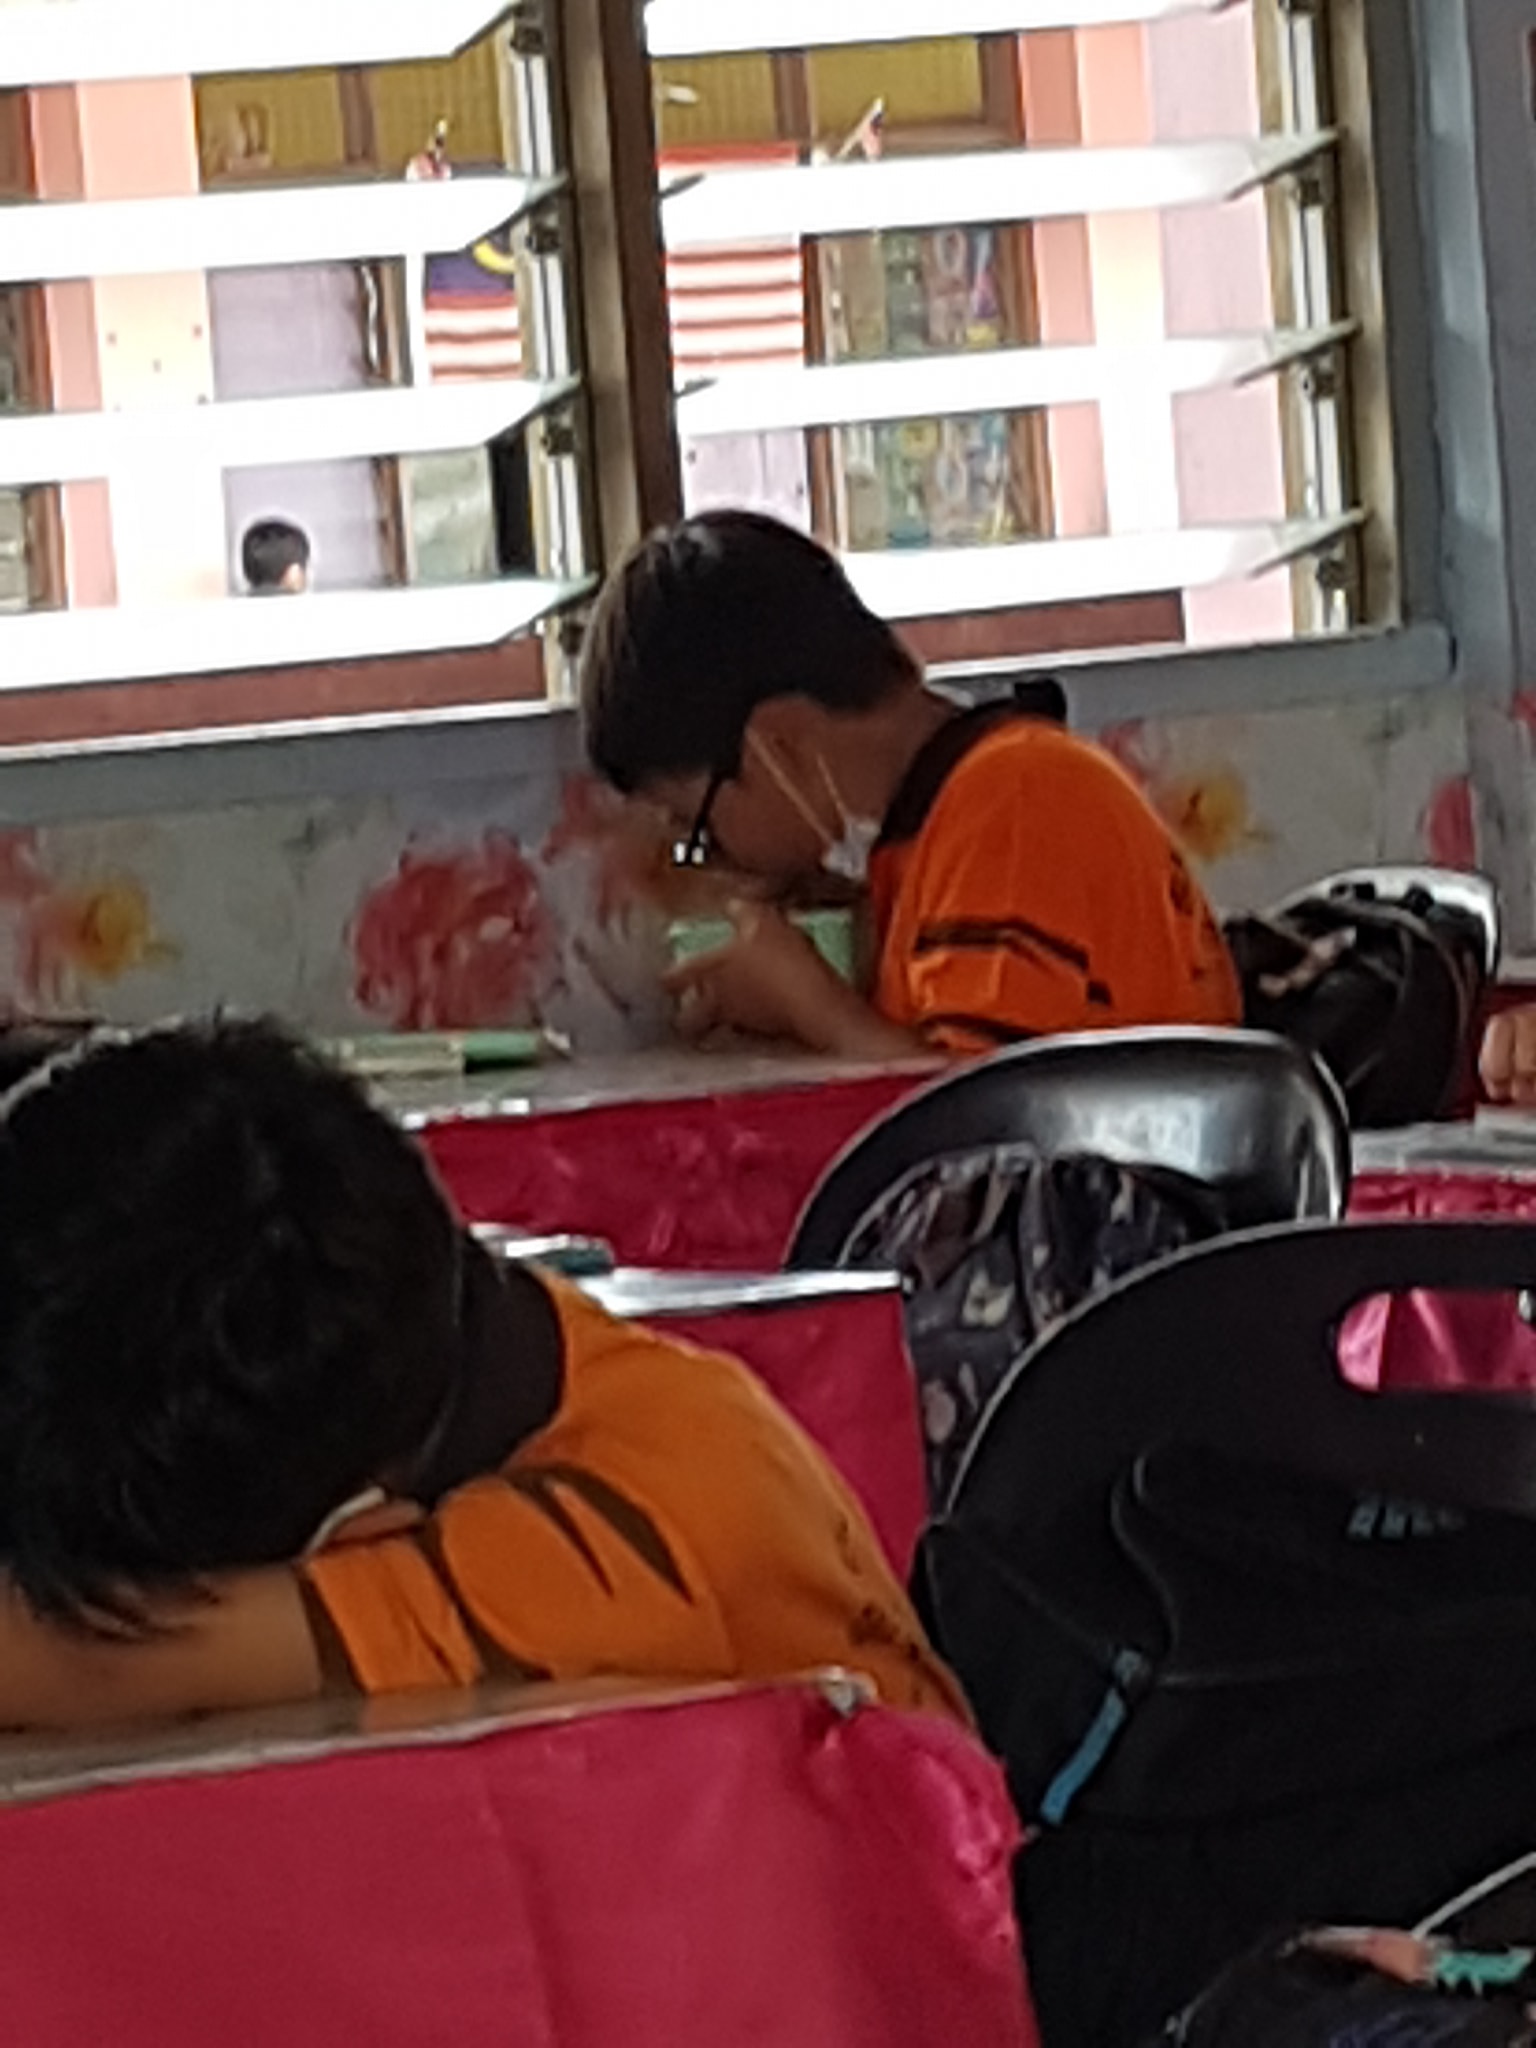 Student discretely eats lunch in respect of others during Ramadan - student